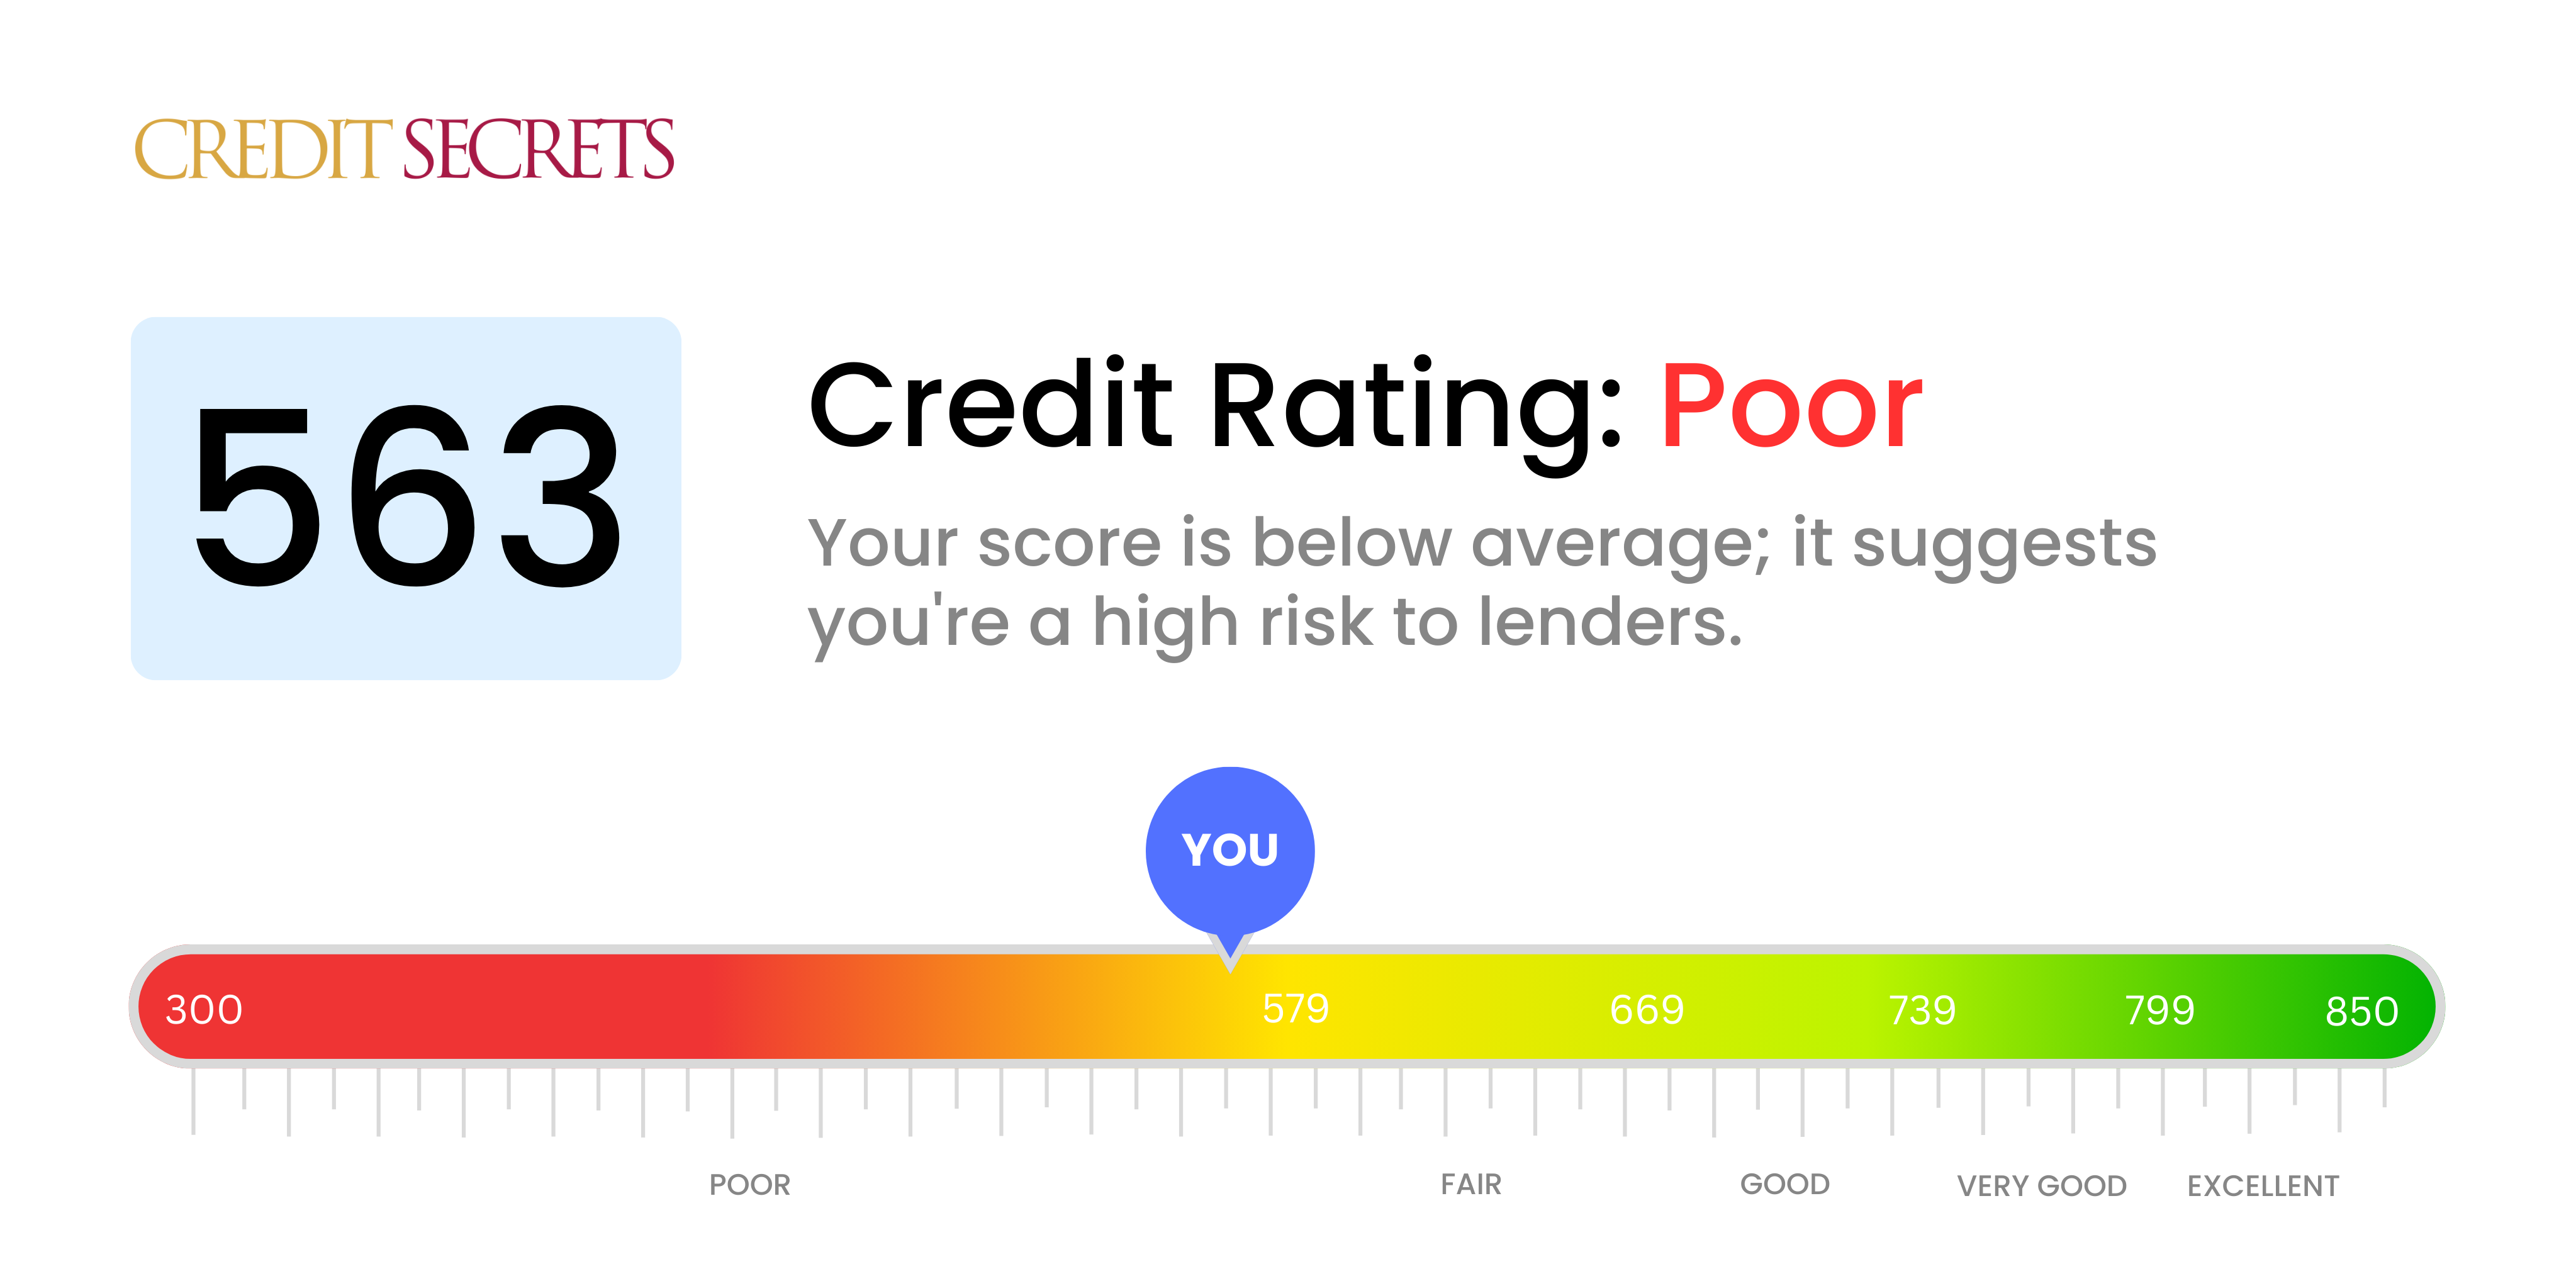 Is 563 a good credit score?